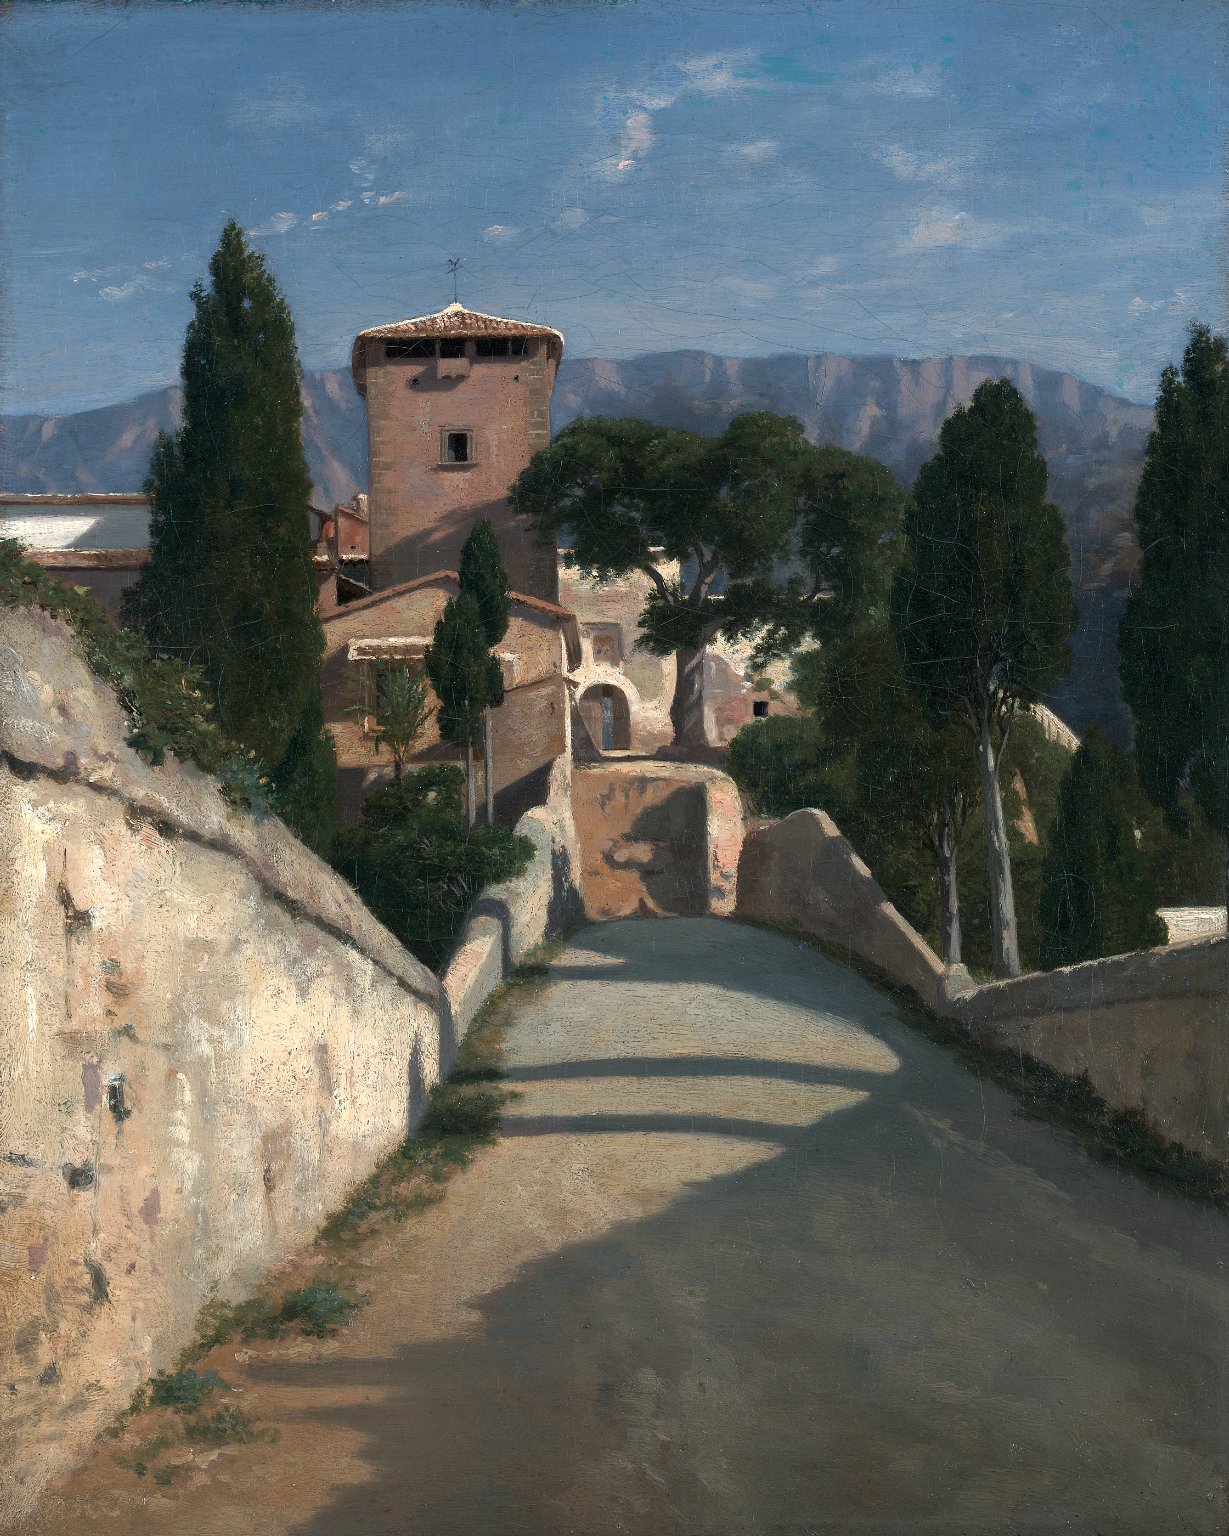 A poplar lined road leads down to a wall at the center of the canvas. A tower and a collection of buildings appear center with a background of mountains.